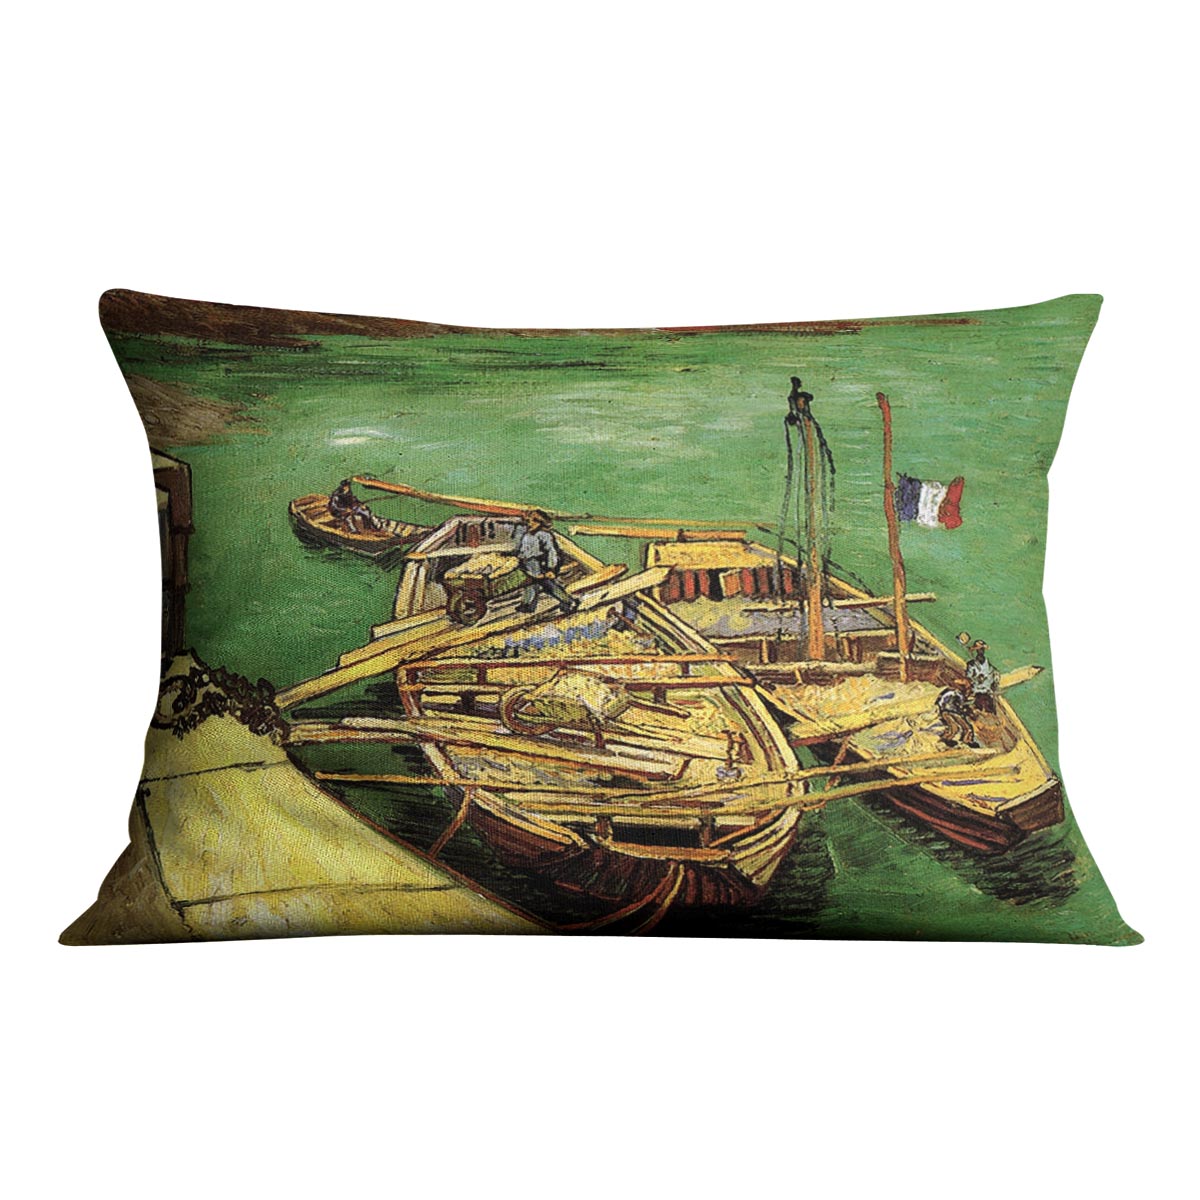 Quay with Men Unloading Sand Barges by Van Gogh Cushion